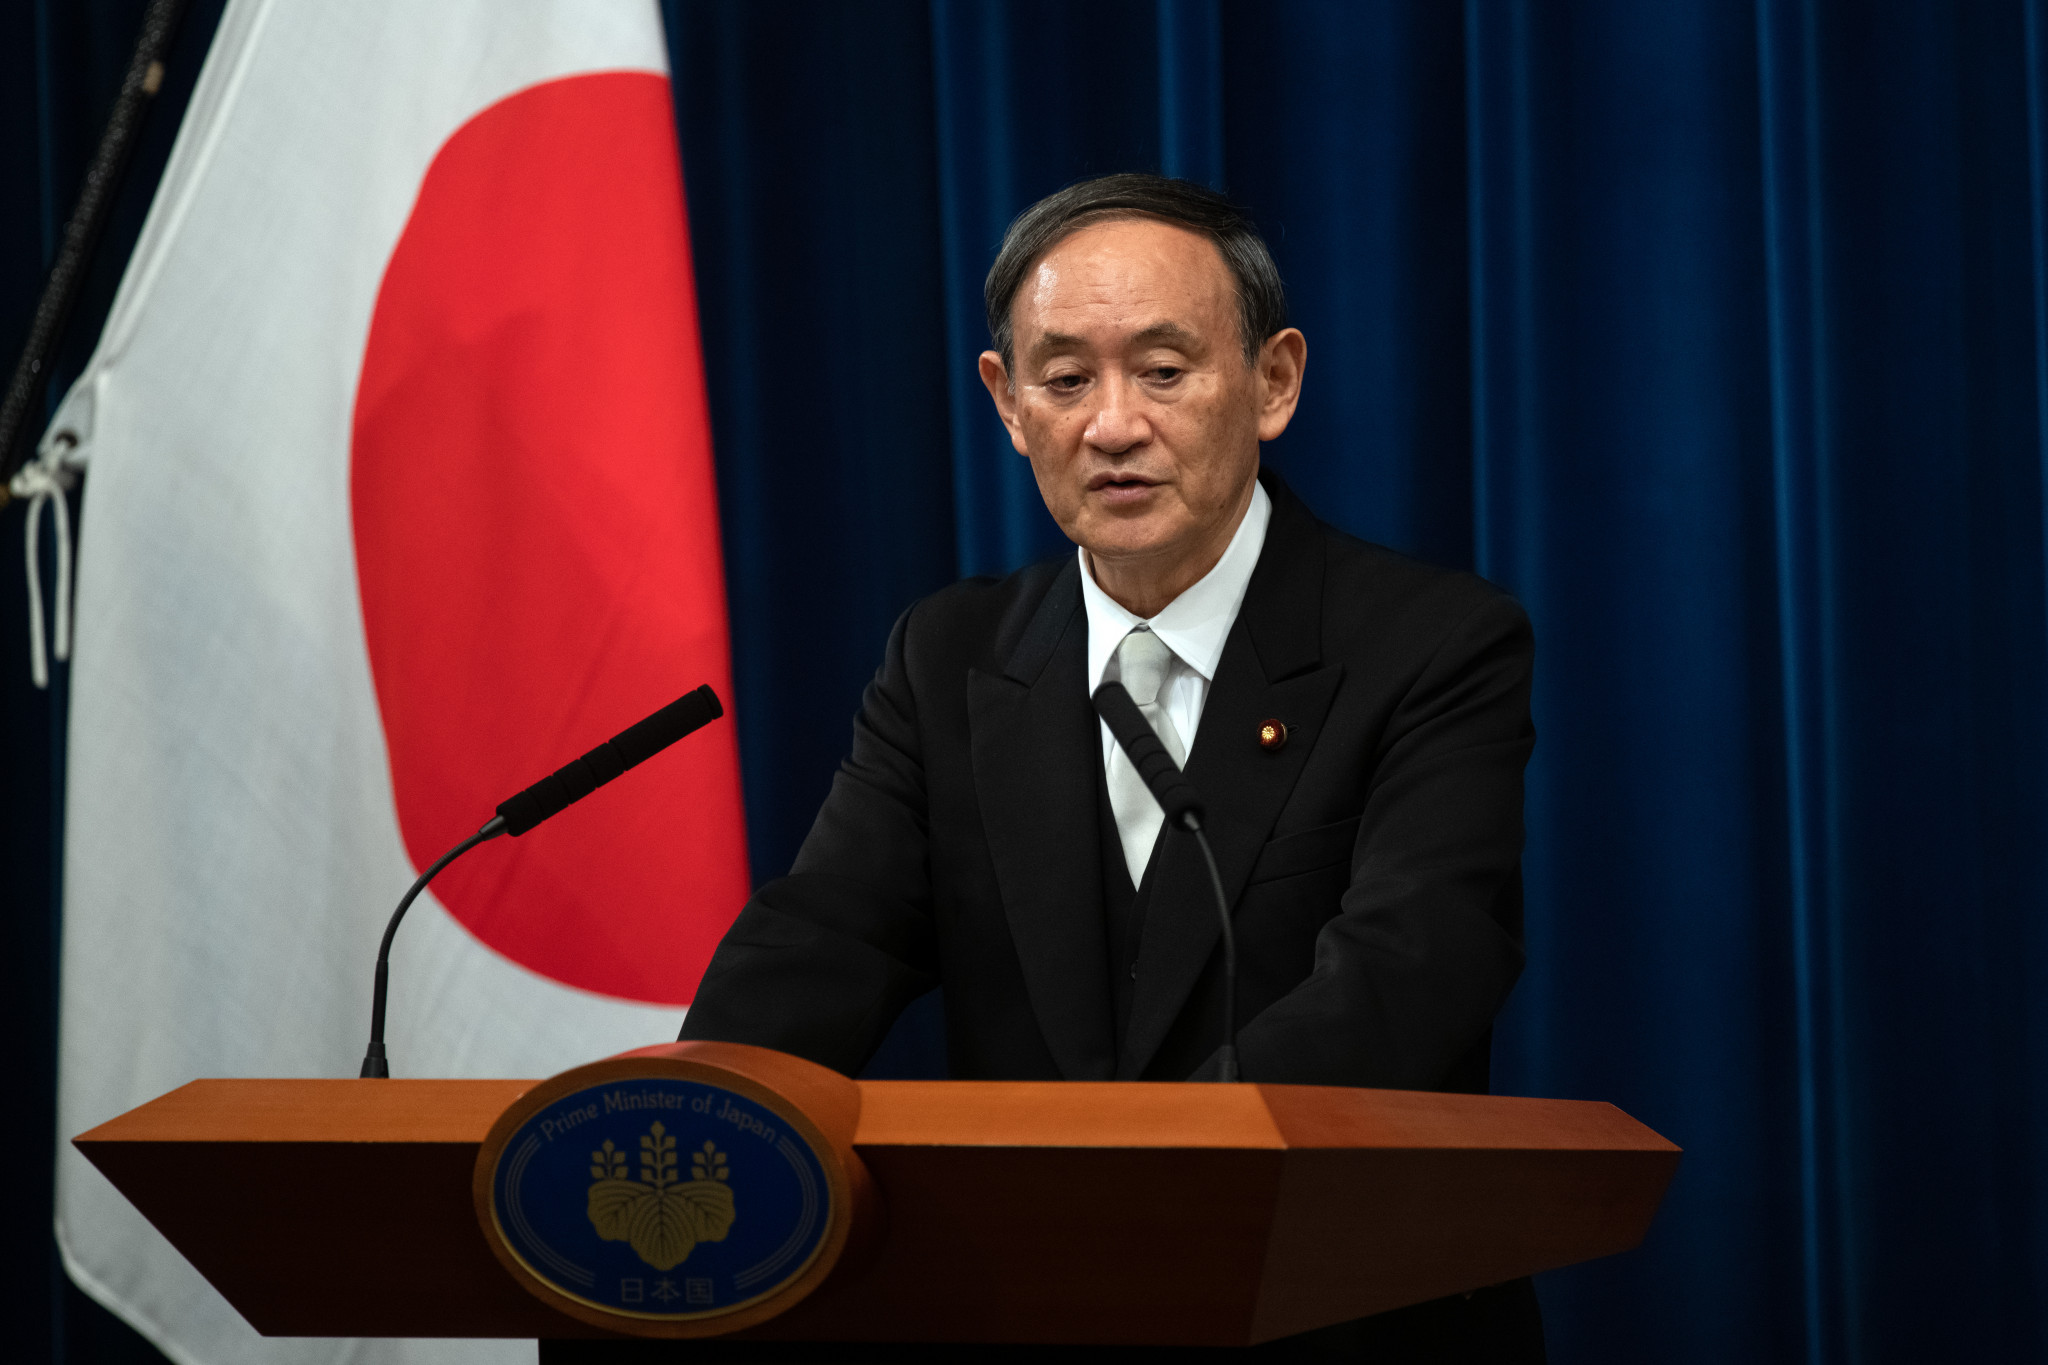 Japanese Prime Minister Yoshihide Suga is understood to have sent a letter in support of the IOC's stance on vaccinating participants at Tokyo 2020 ©Getty Images